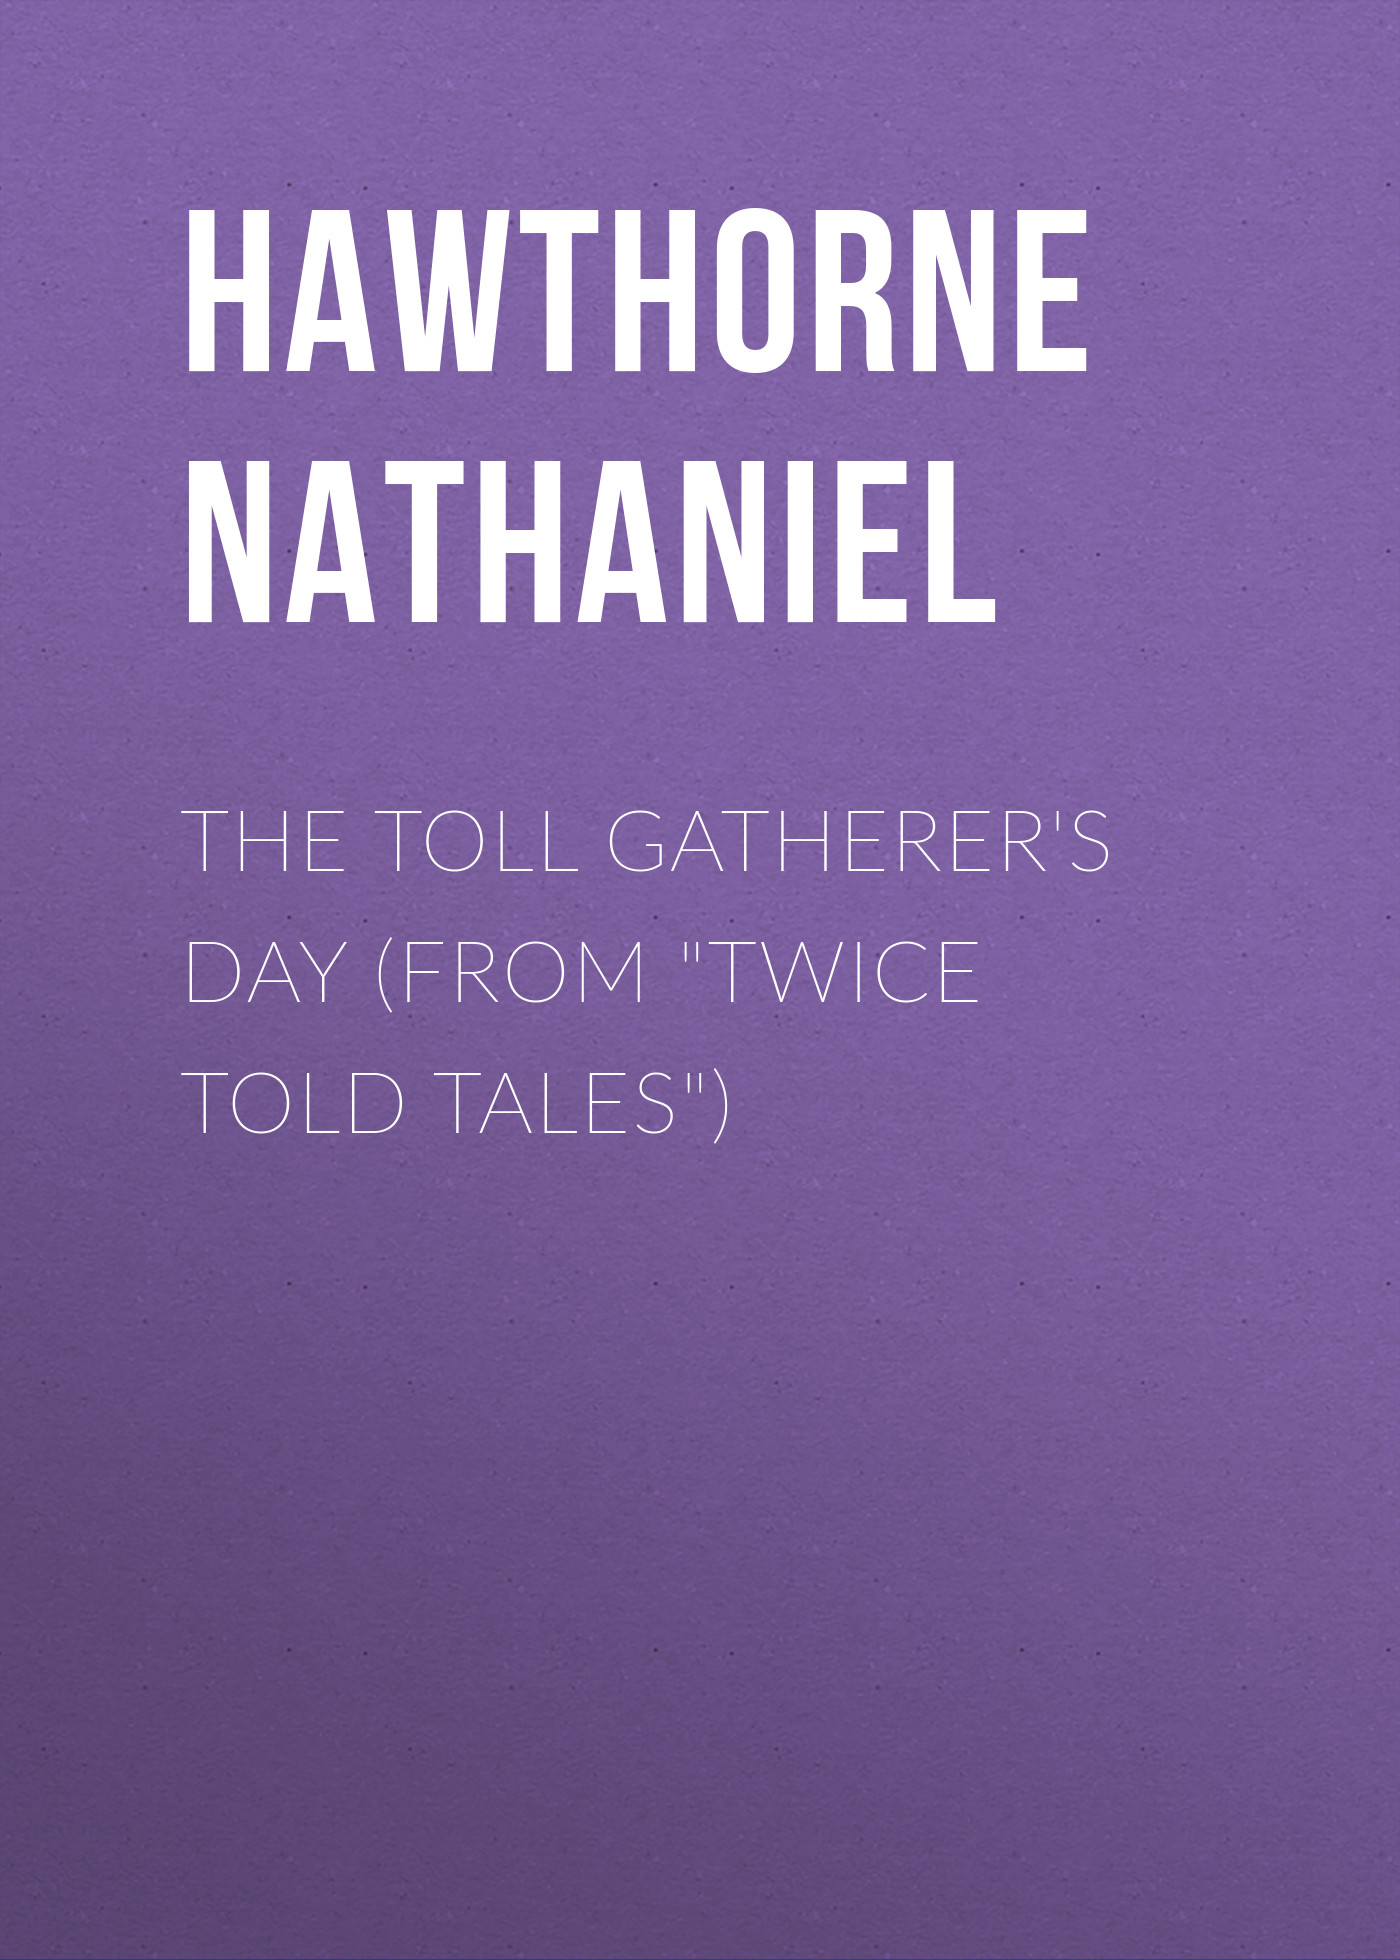 The Toll Gatherer's Day (From"Twice Told Tales")